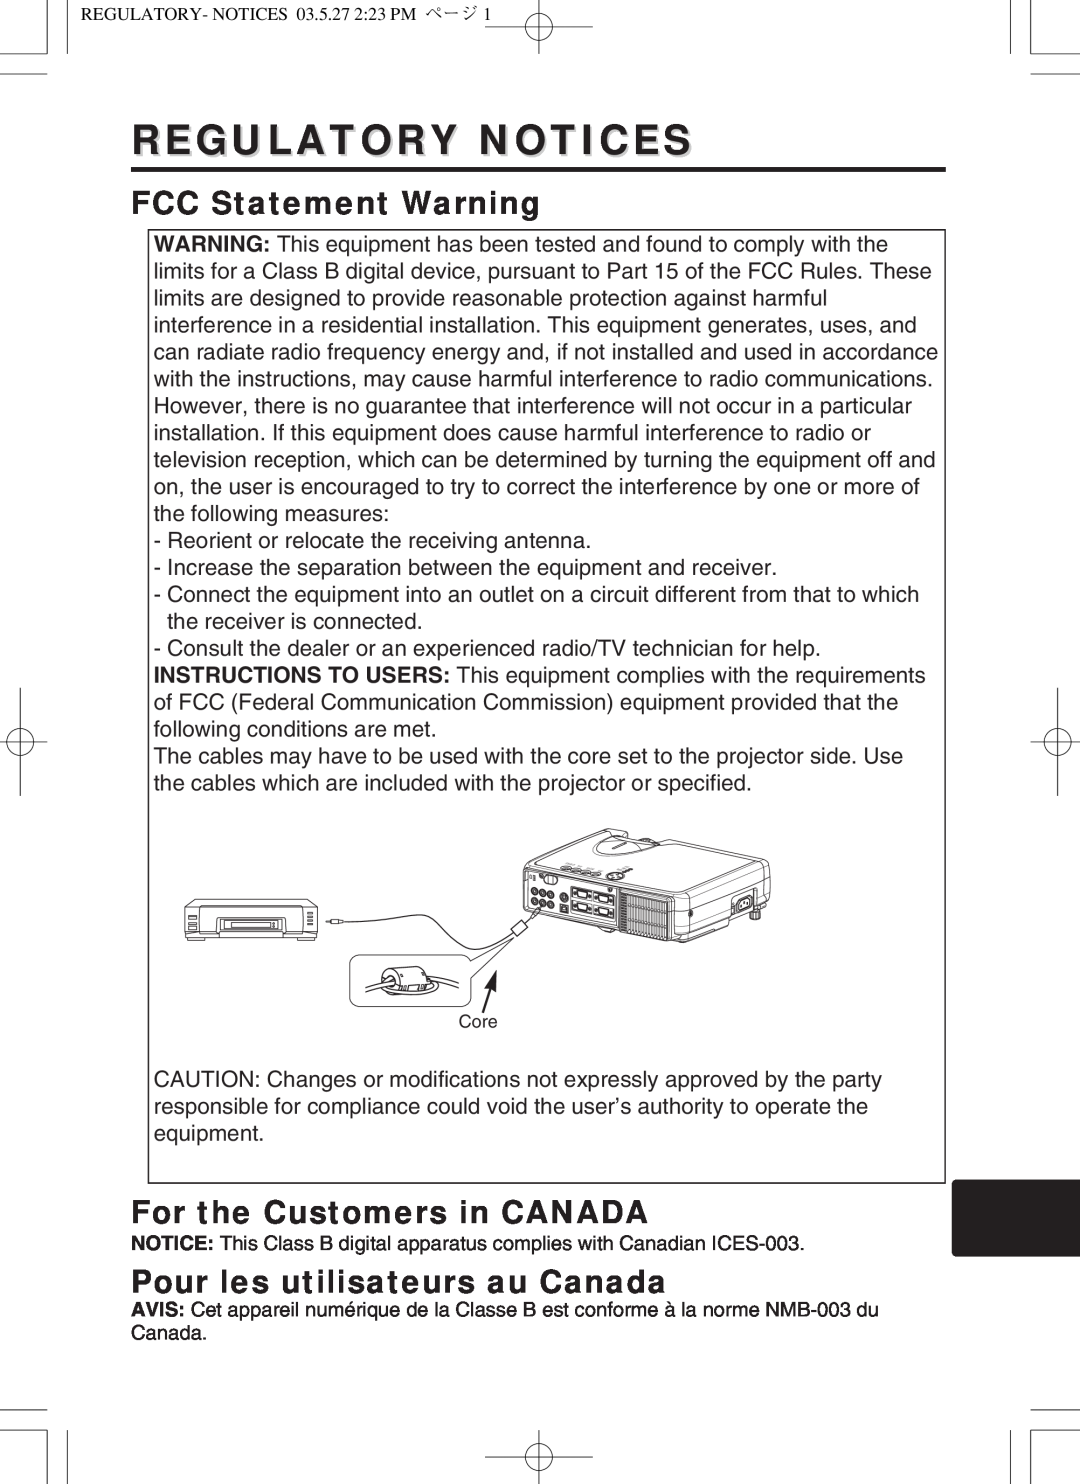 BOXLIGHT CP-322I Regulatory Notices, FCC Statement Warning, For the Customers in CANADA, Pour les utilisateurs au Canada 